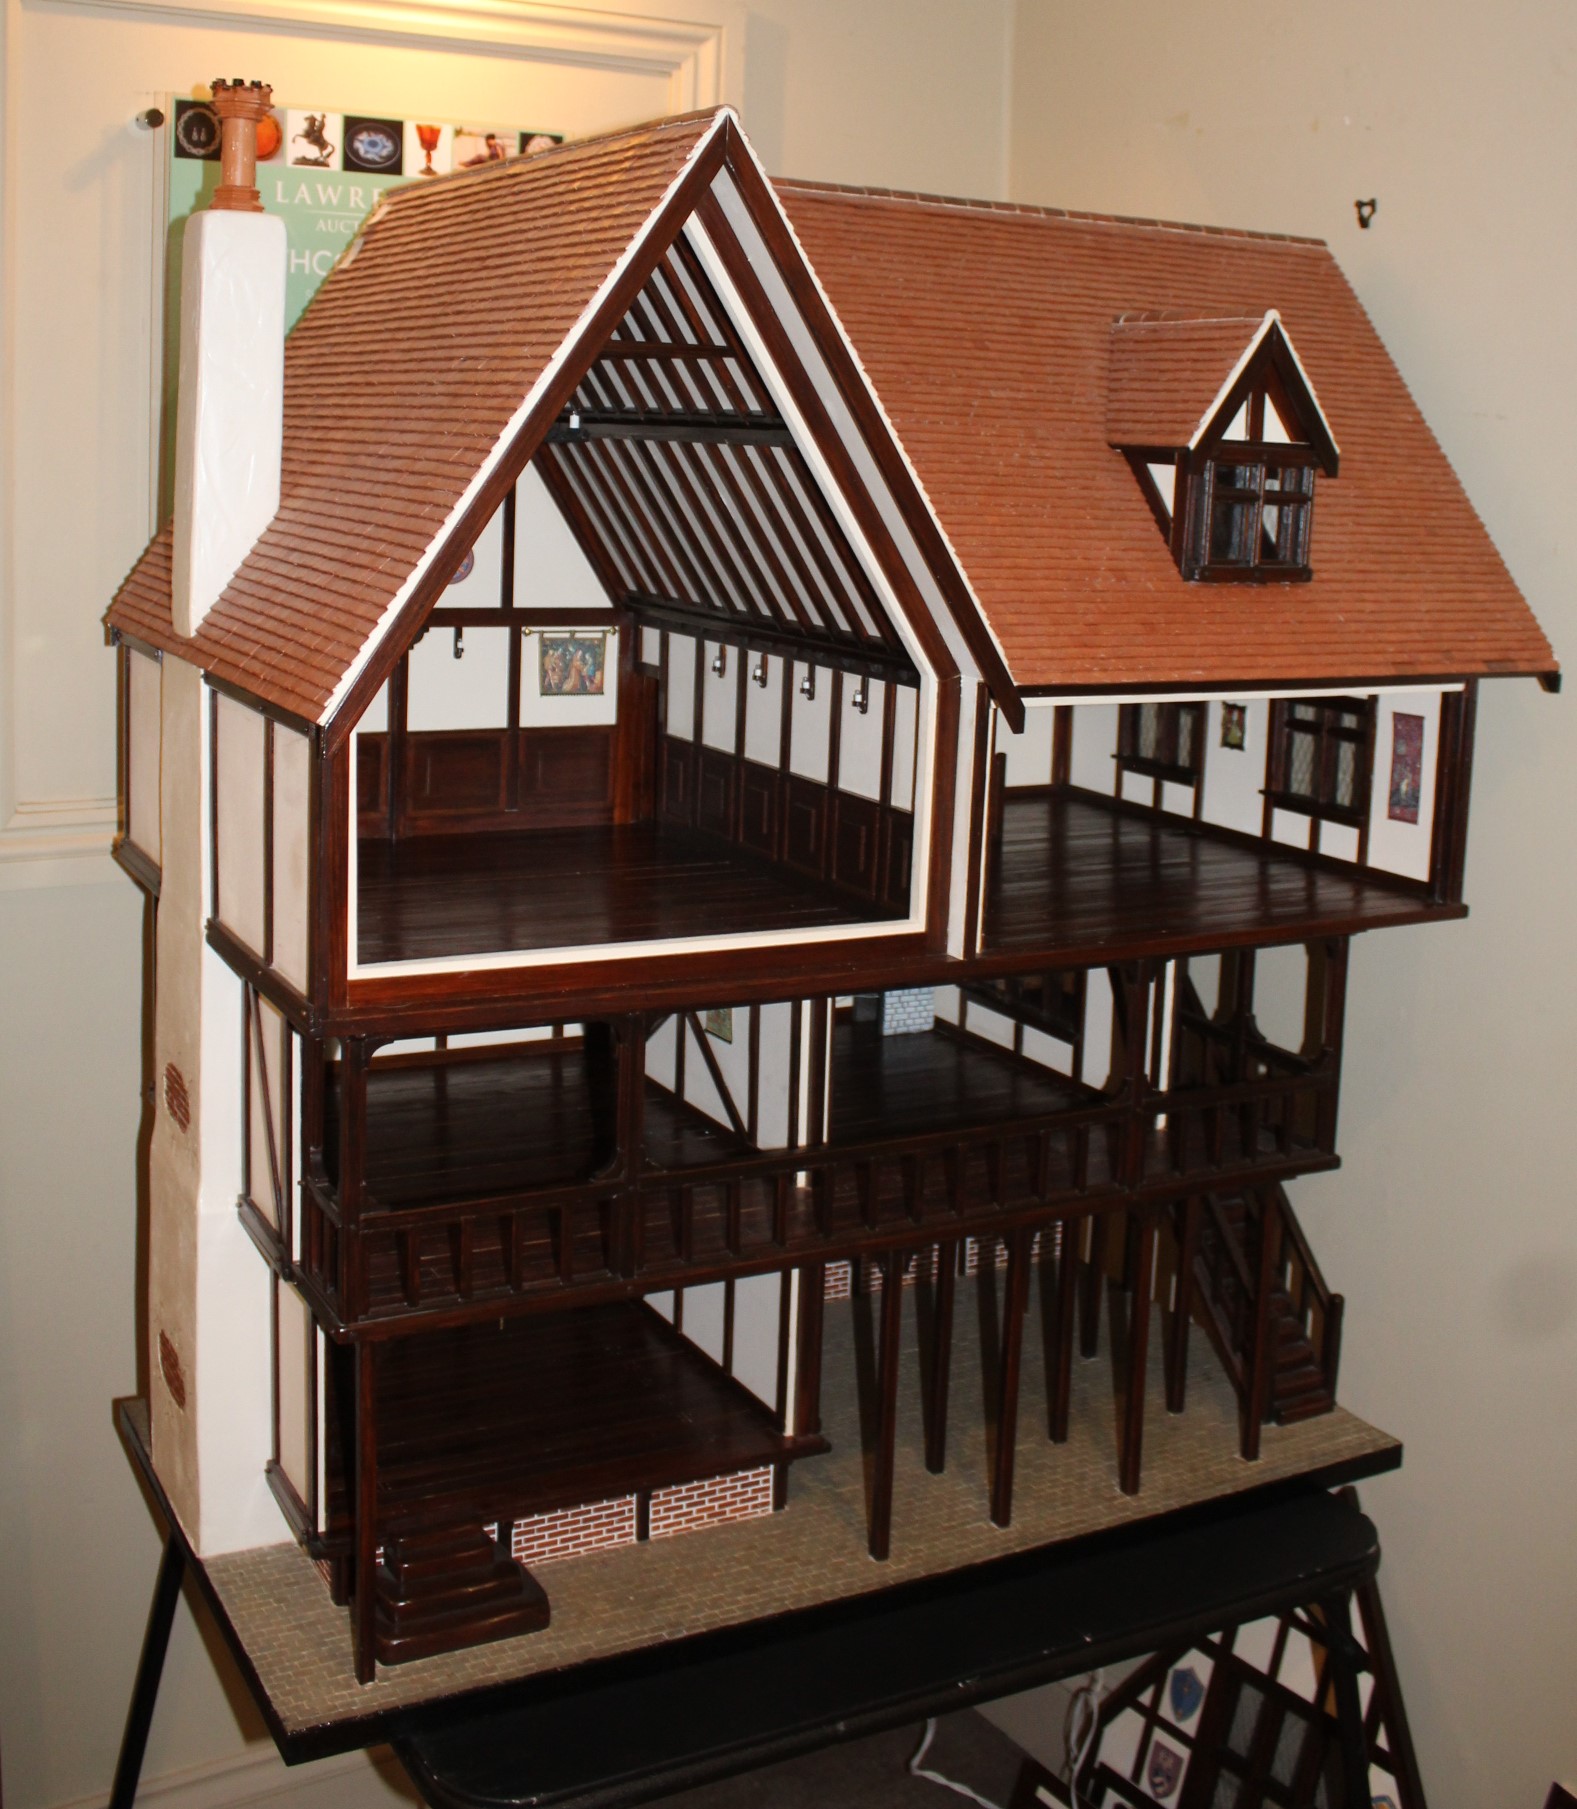 TUDOR STYLE MODERN DOLLS HOUSE & CONTENTS a modern 3 storey wooden dolls house in the Tudor style, - Image 3 of 11